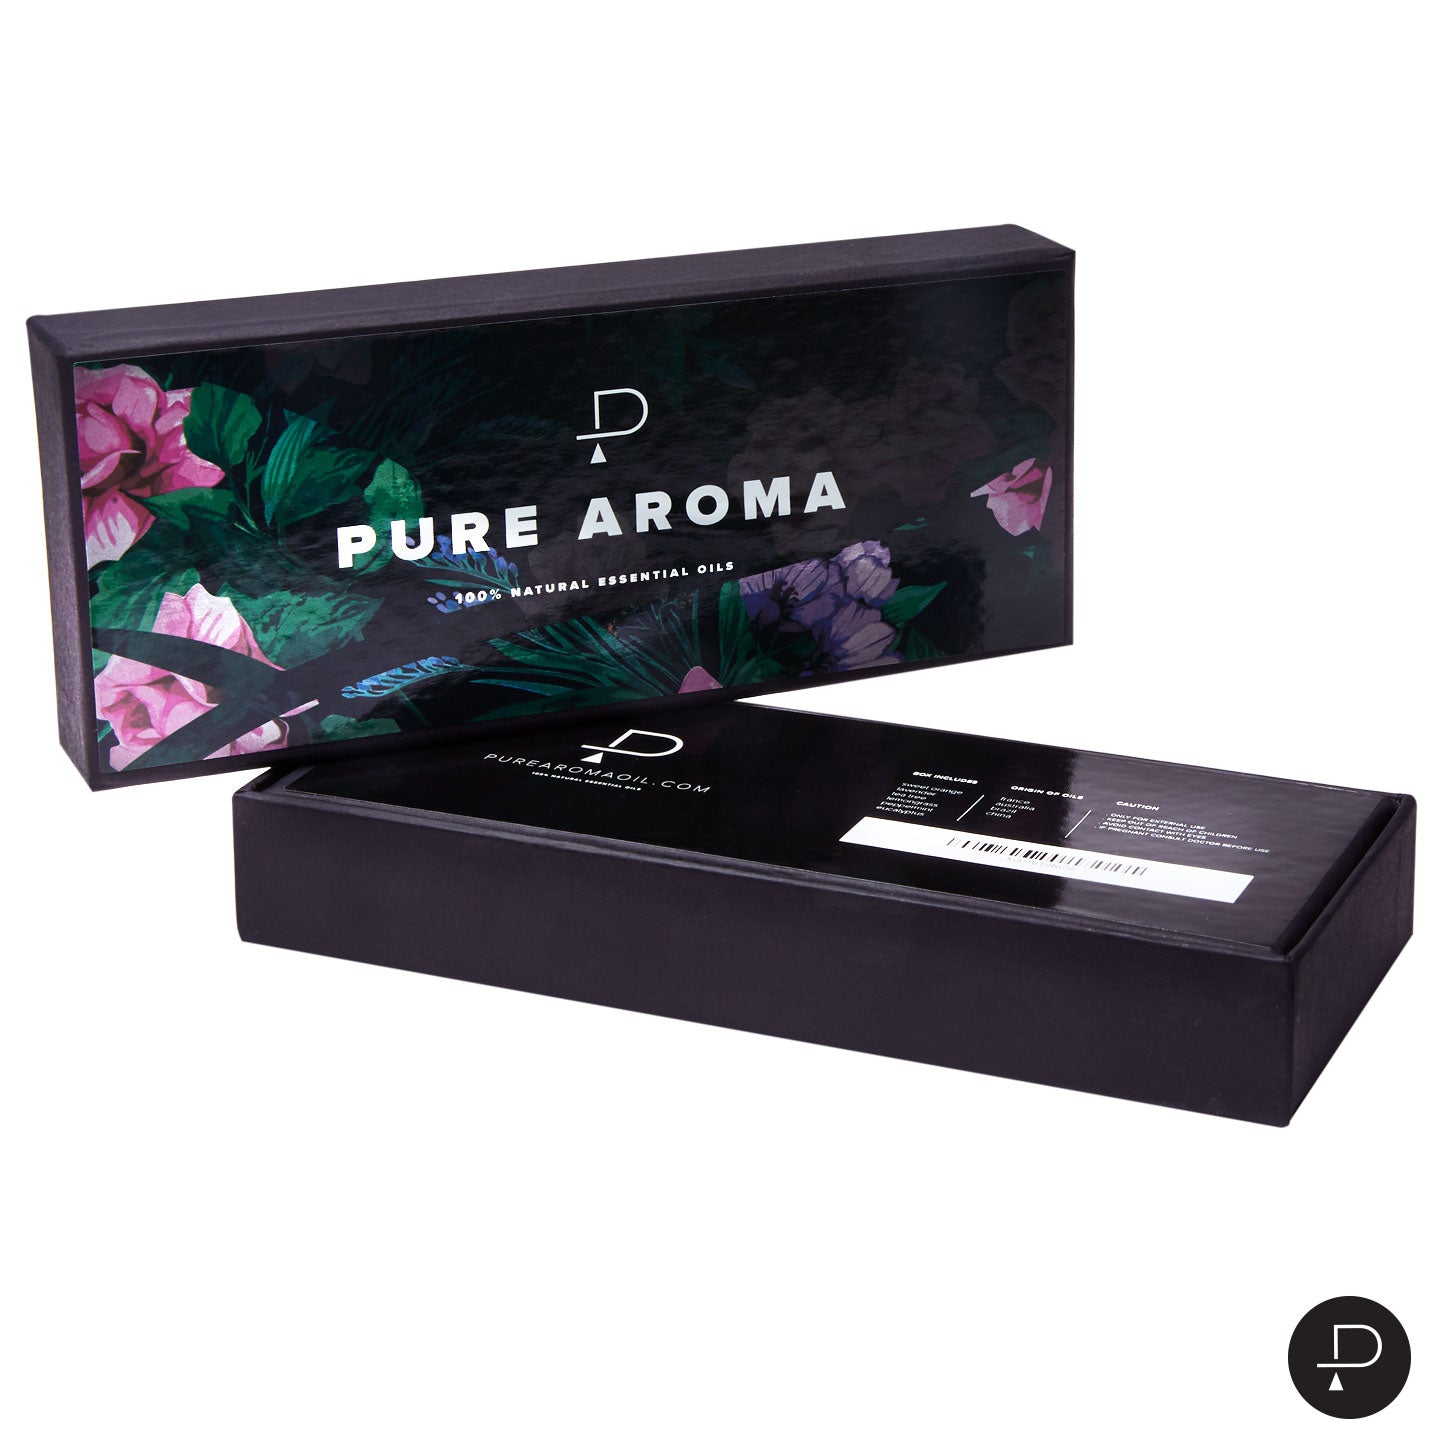 PURE AROMA Essential Oils - Top 6 Aromatherapy Oils in 1 Box (10 Ml)